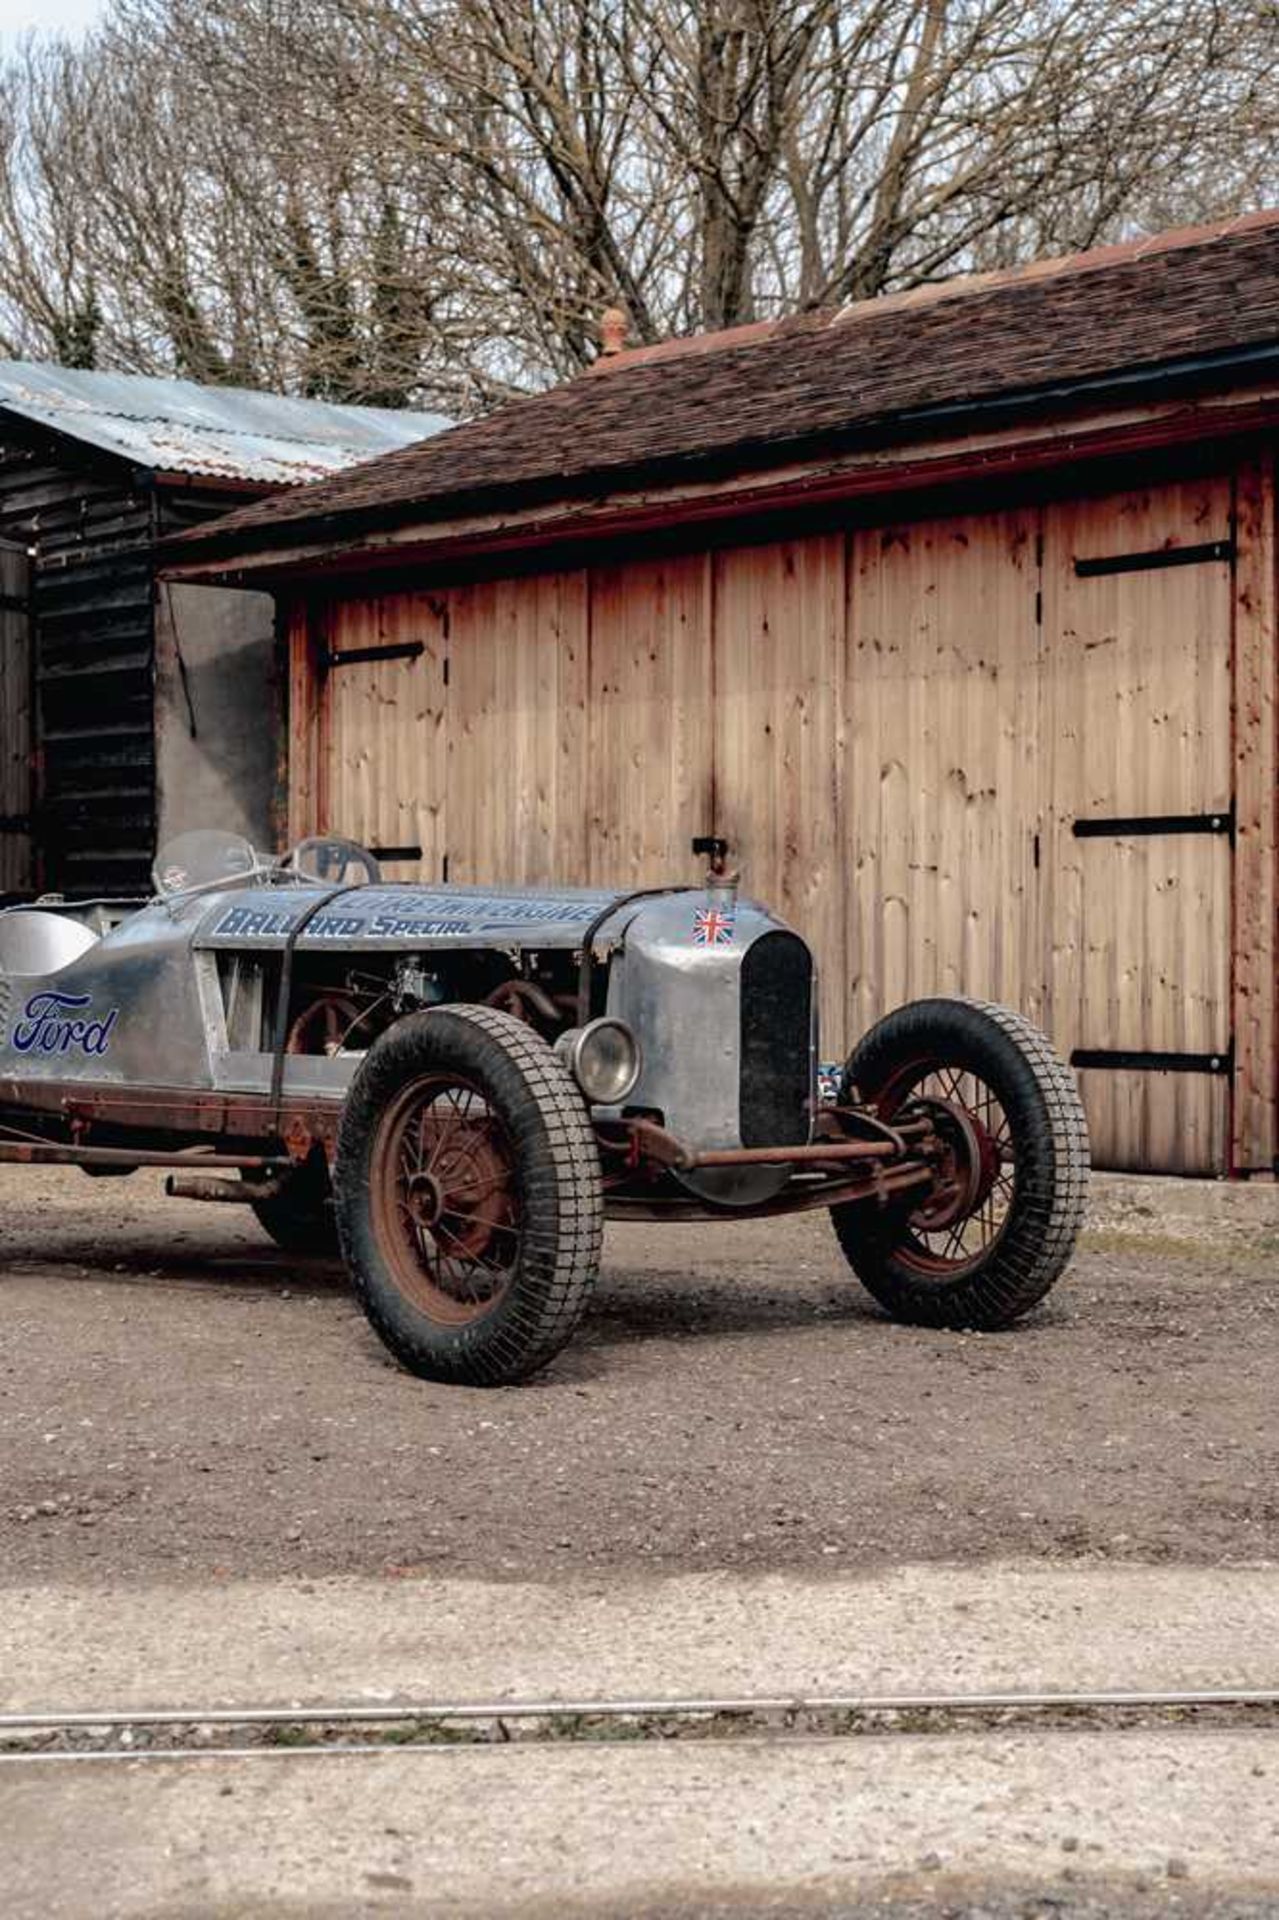 1930 Ford Model A "The Ballard Special" Speedster One off, bespoke built twin-engined pre-war racing - Image 10 of 94